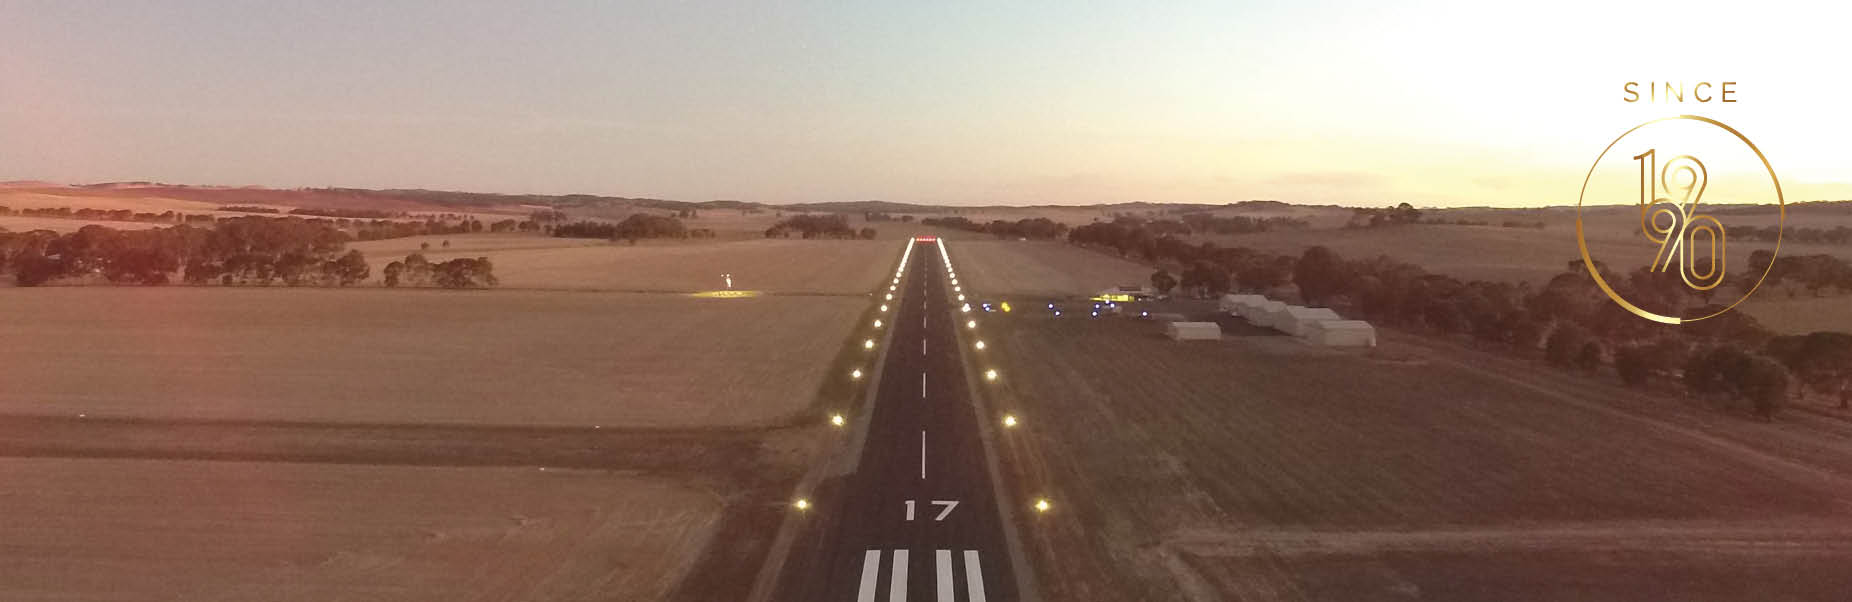 Contact Airport Lighting Specialists